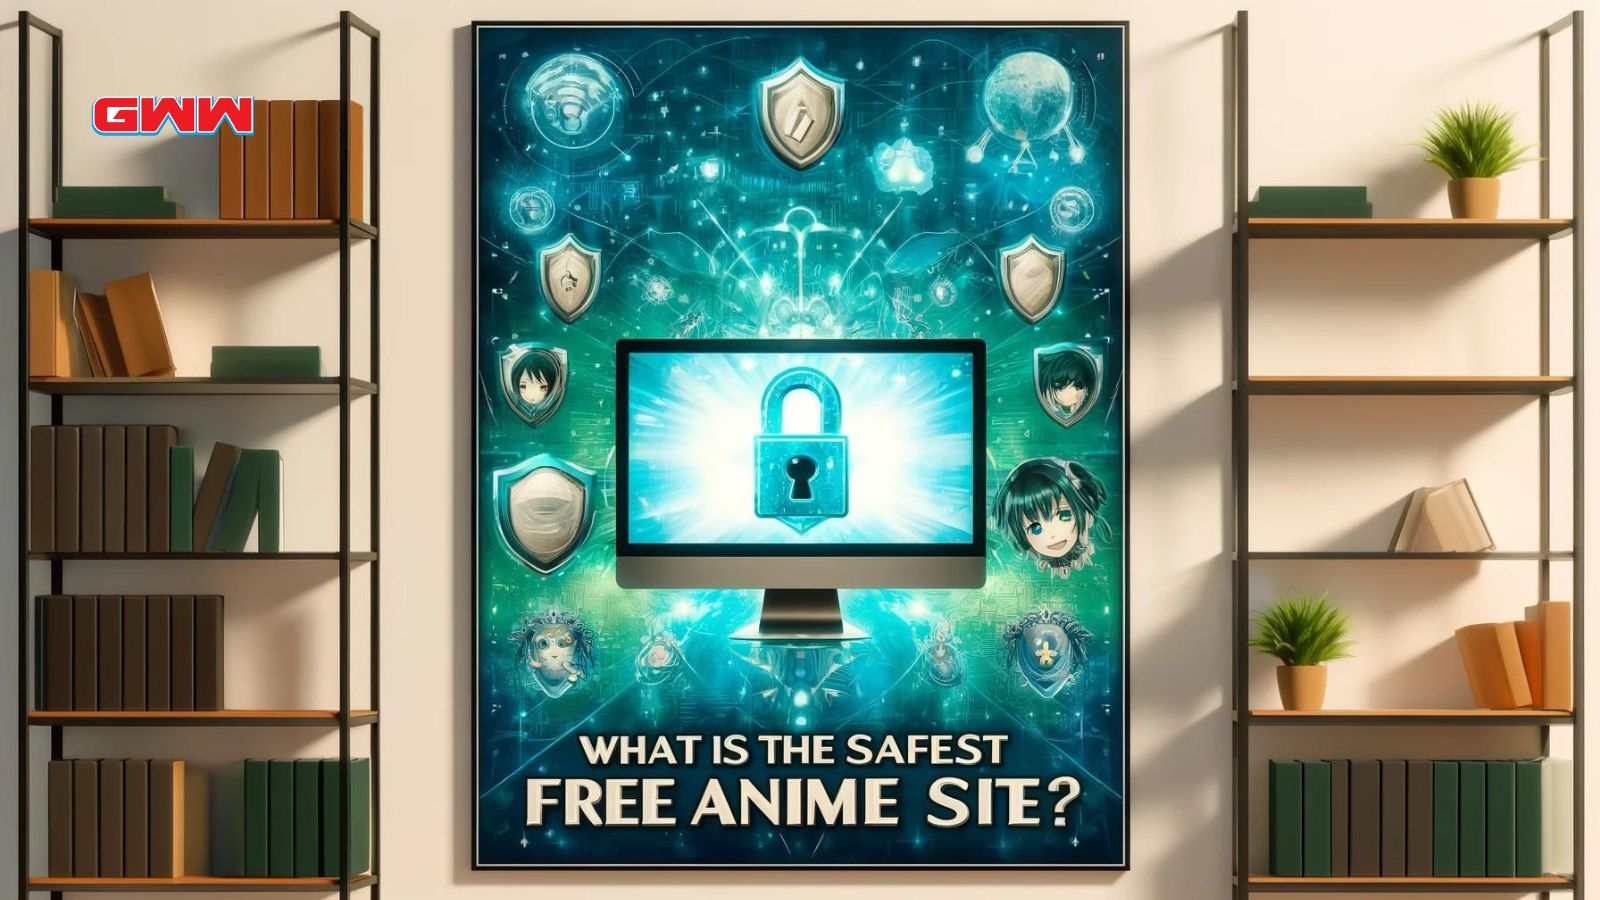 Secure anime streaming site interface on monitor